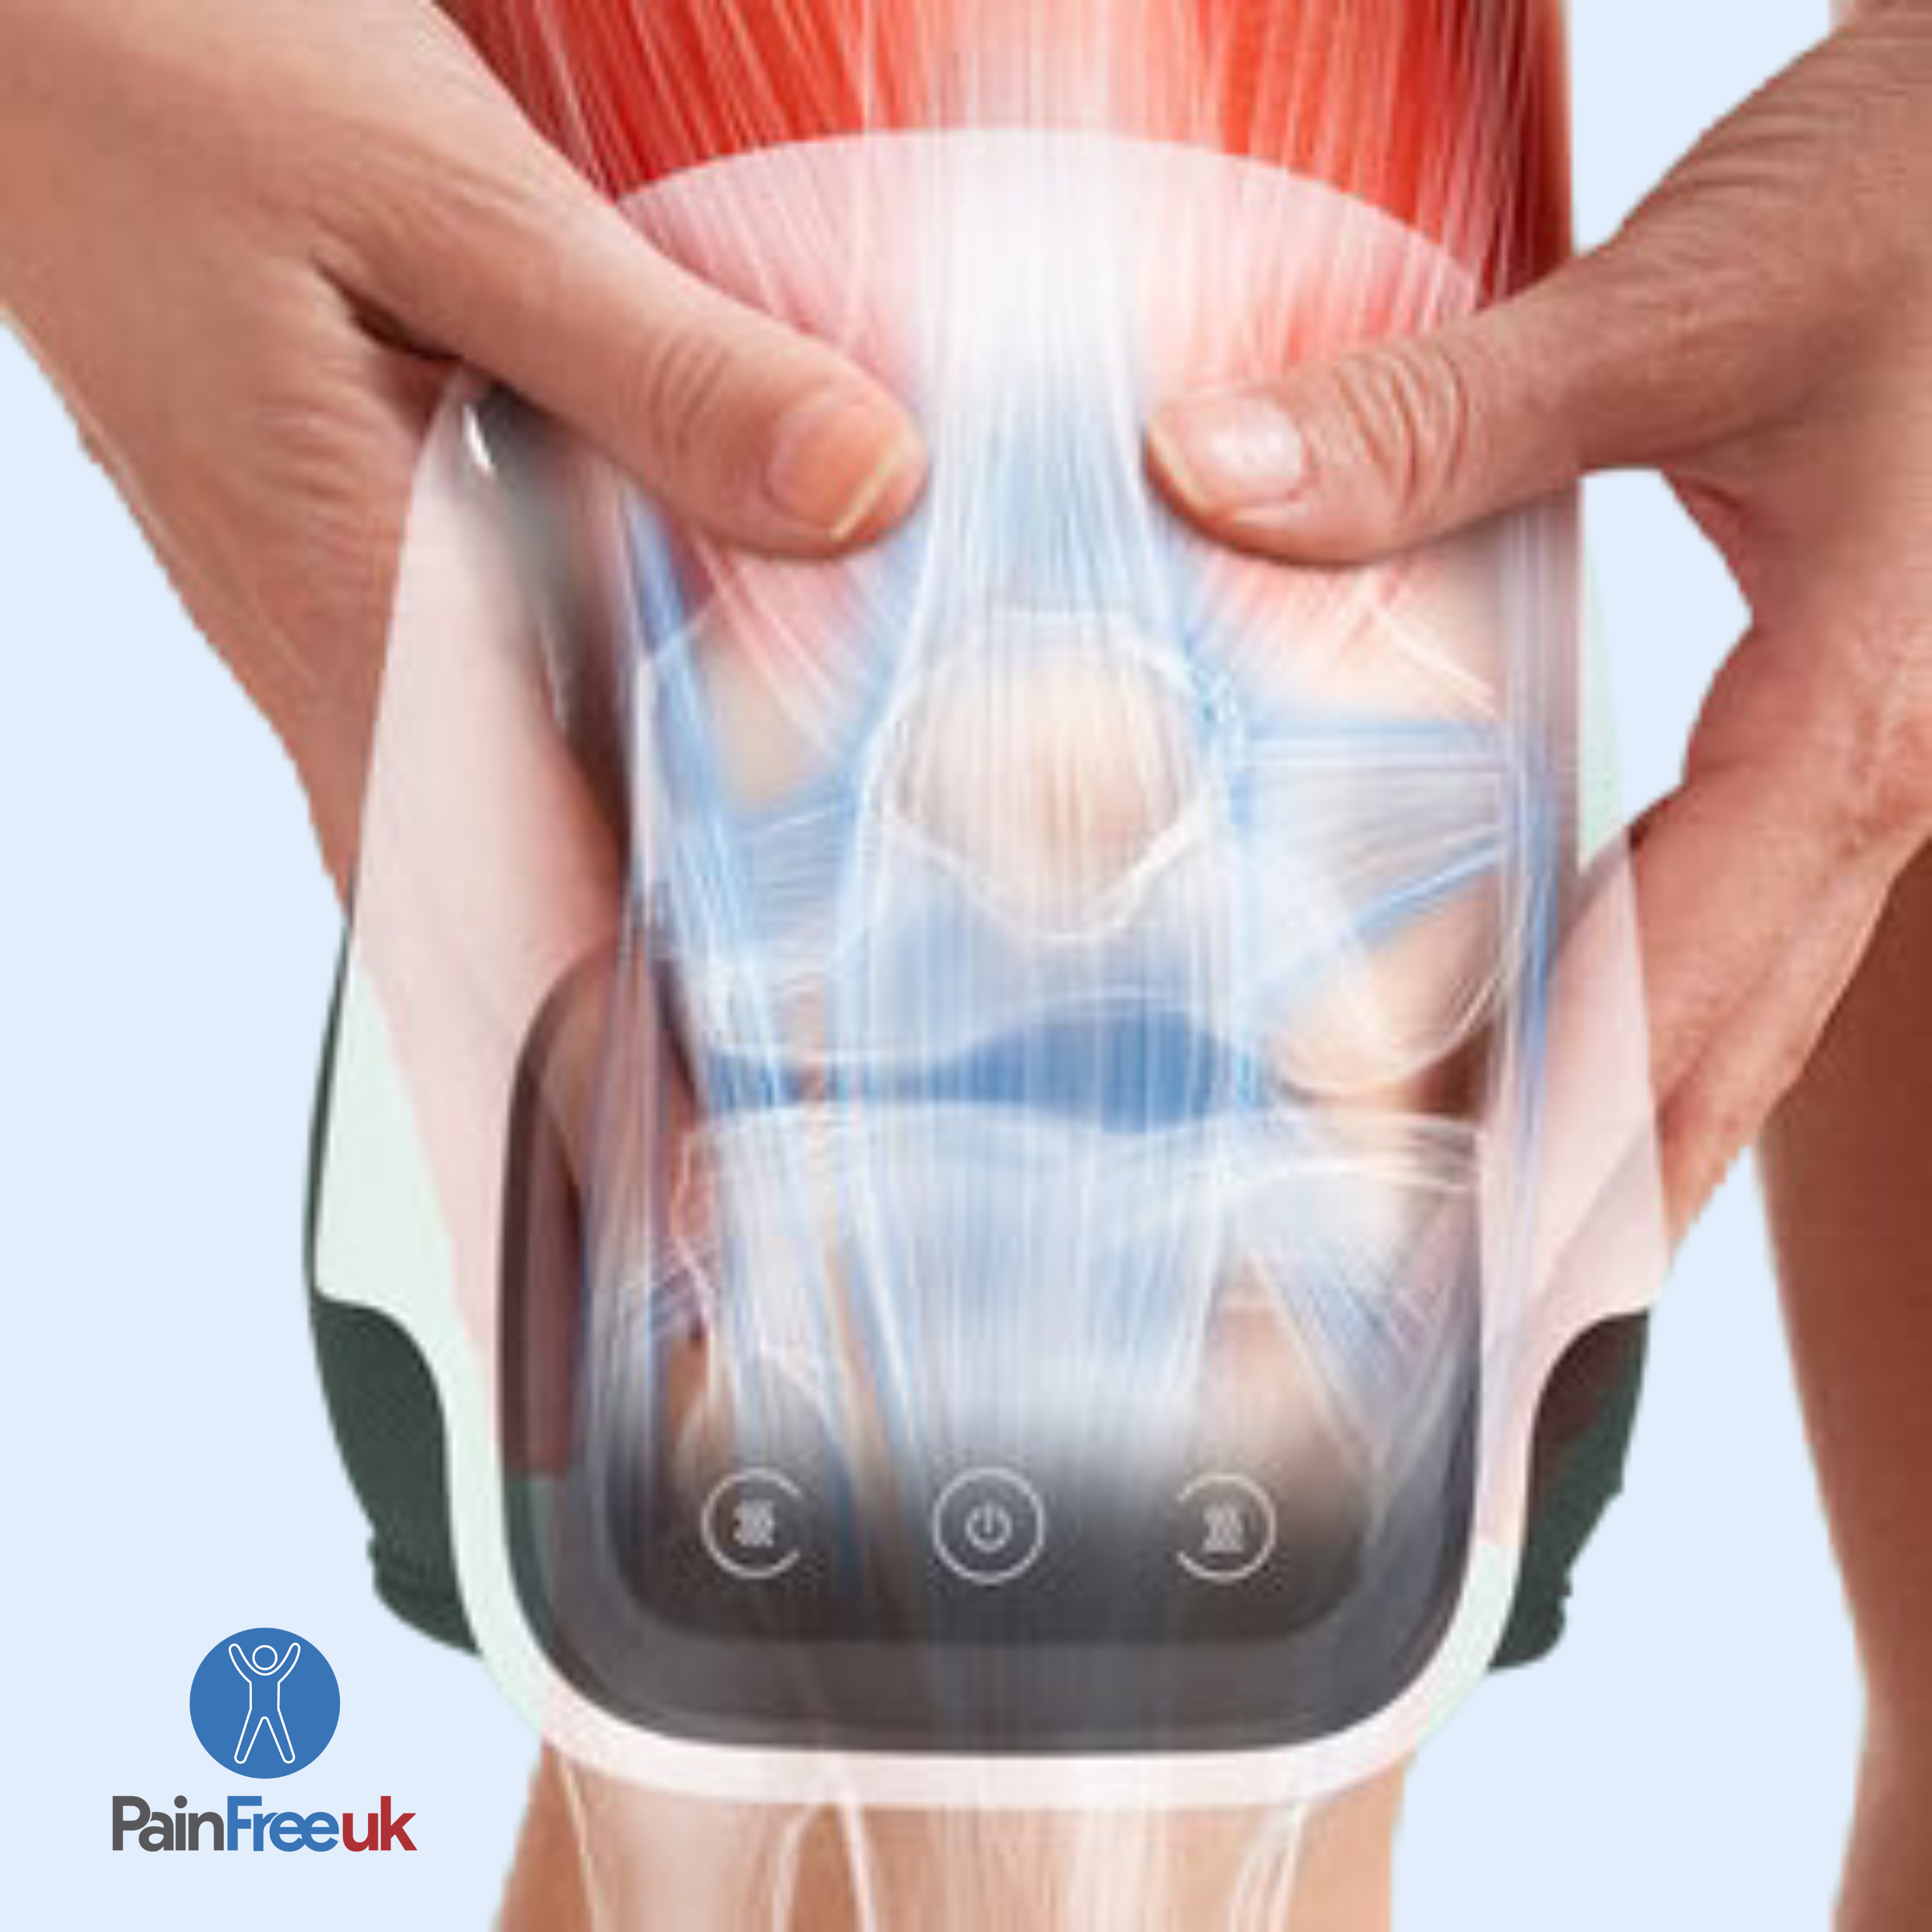 Pain Free UK™ Knee Massager - Temporary Relief From Joint Pain in Just 15 Minutes a Day*